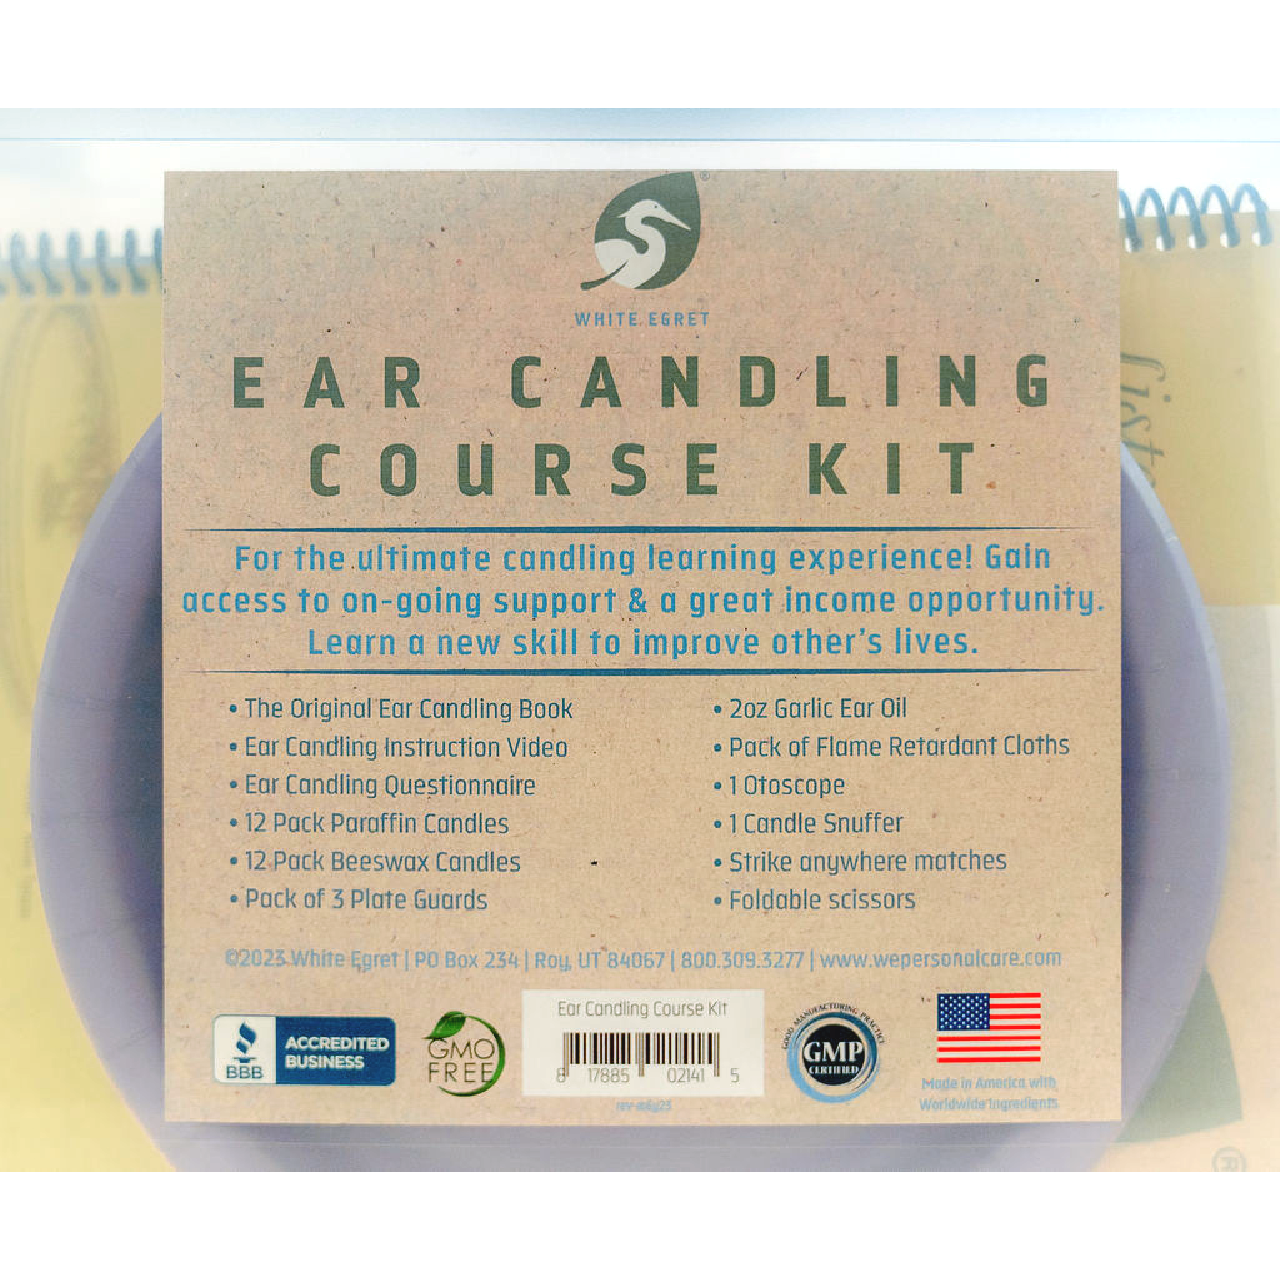 Ear Candling Course Kit - White Egret Personal Care